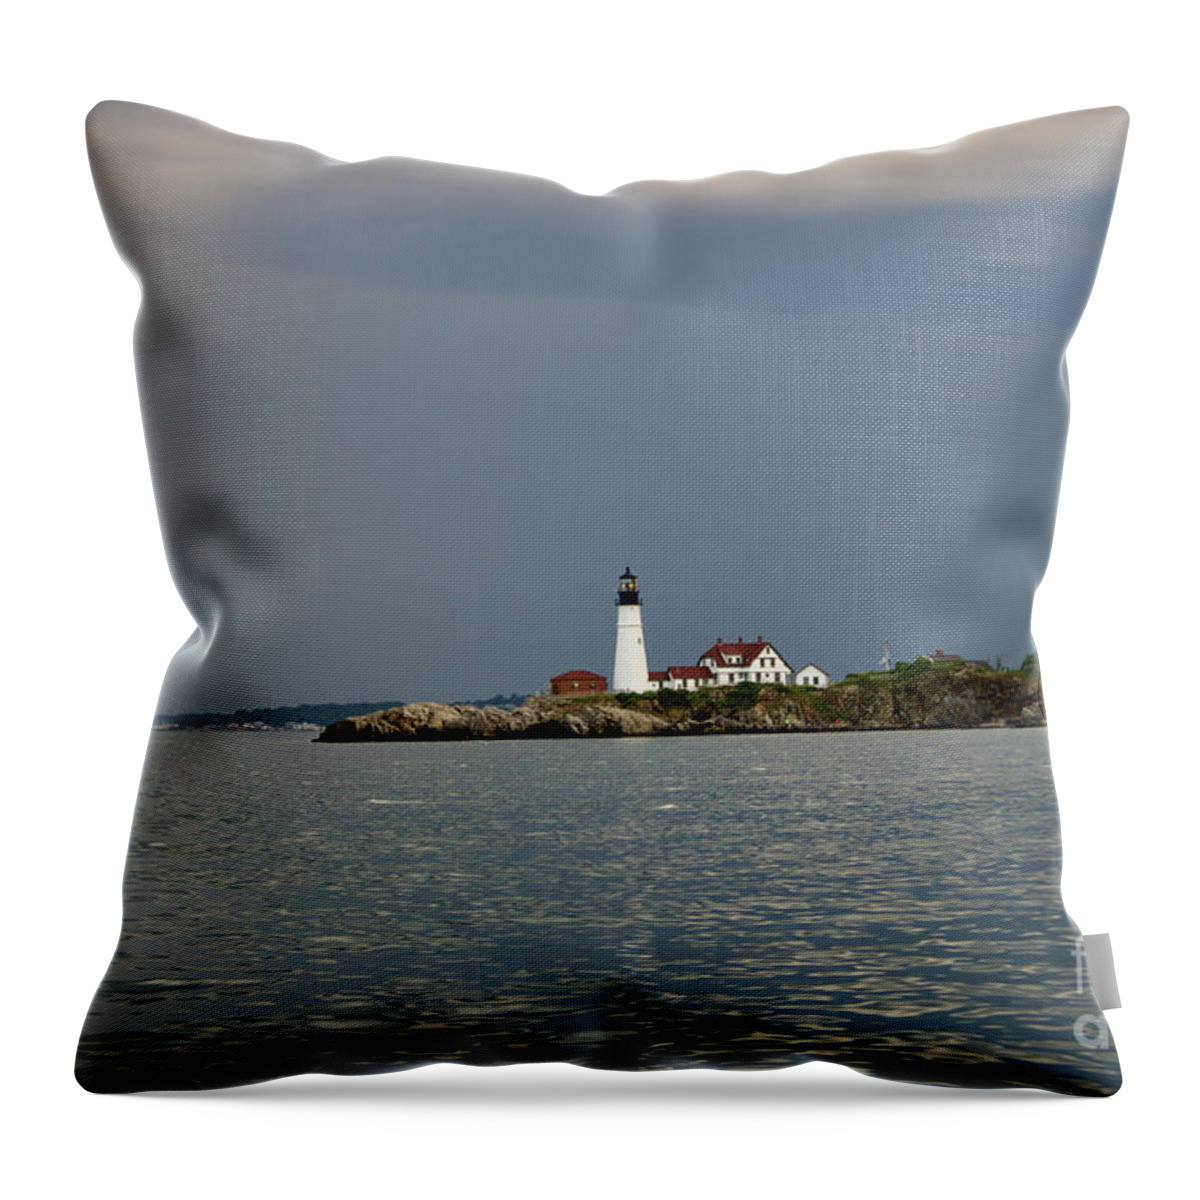 Portland Headlight Throw Pillow featuring the pyrography Lighthouse before the storm by Annamaria Frost